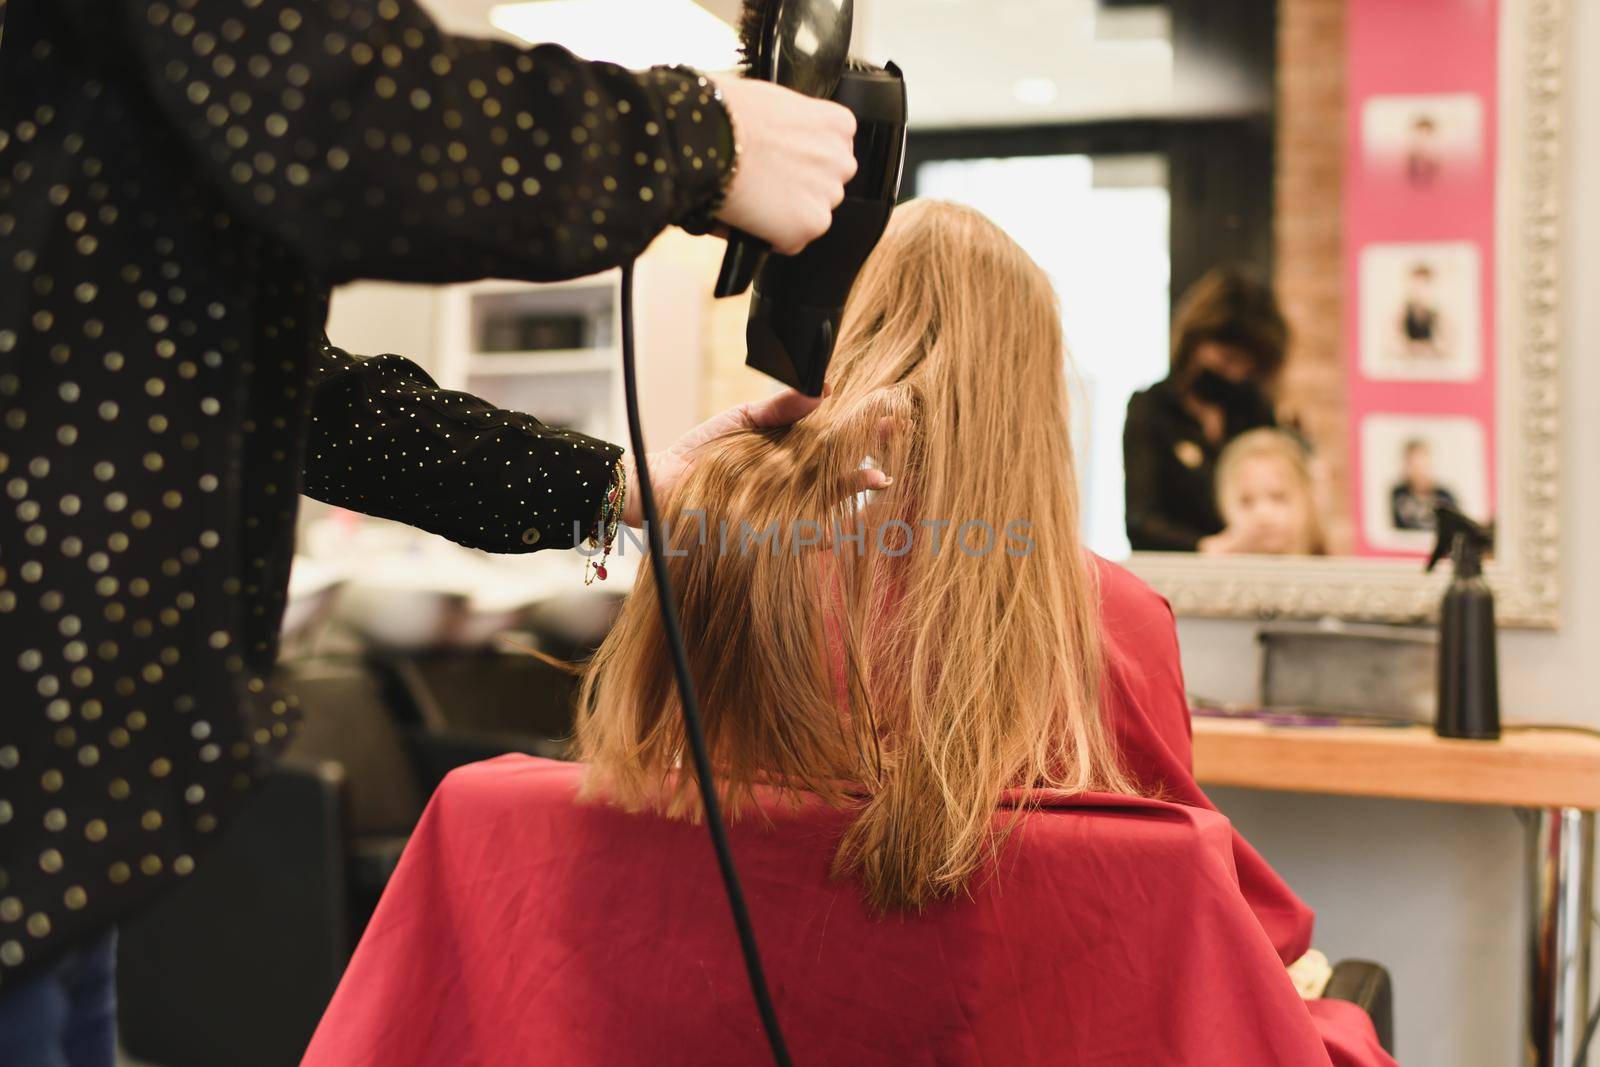 Hairdresser dries hair with a hairdryer at a saon by Godi